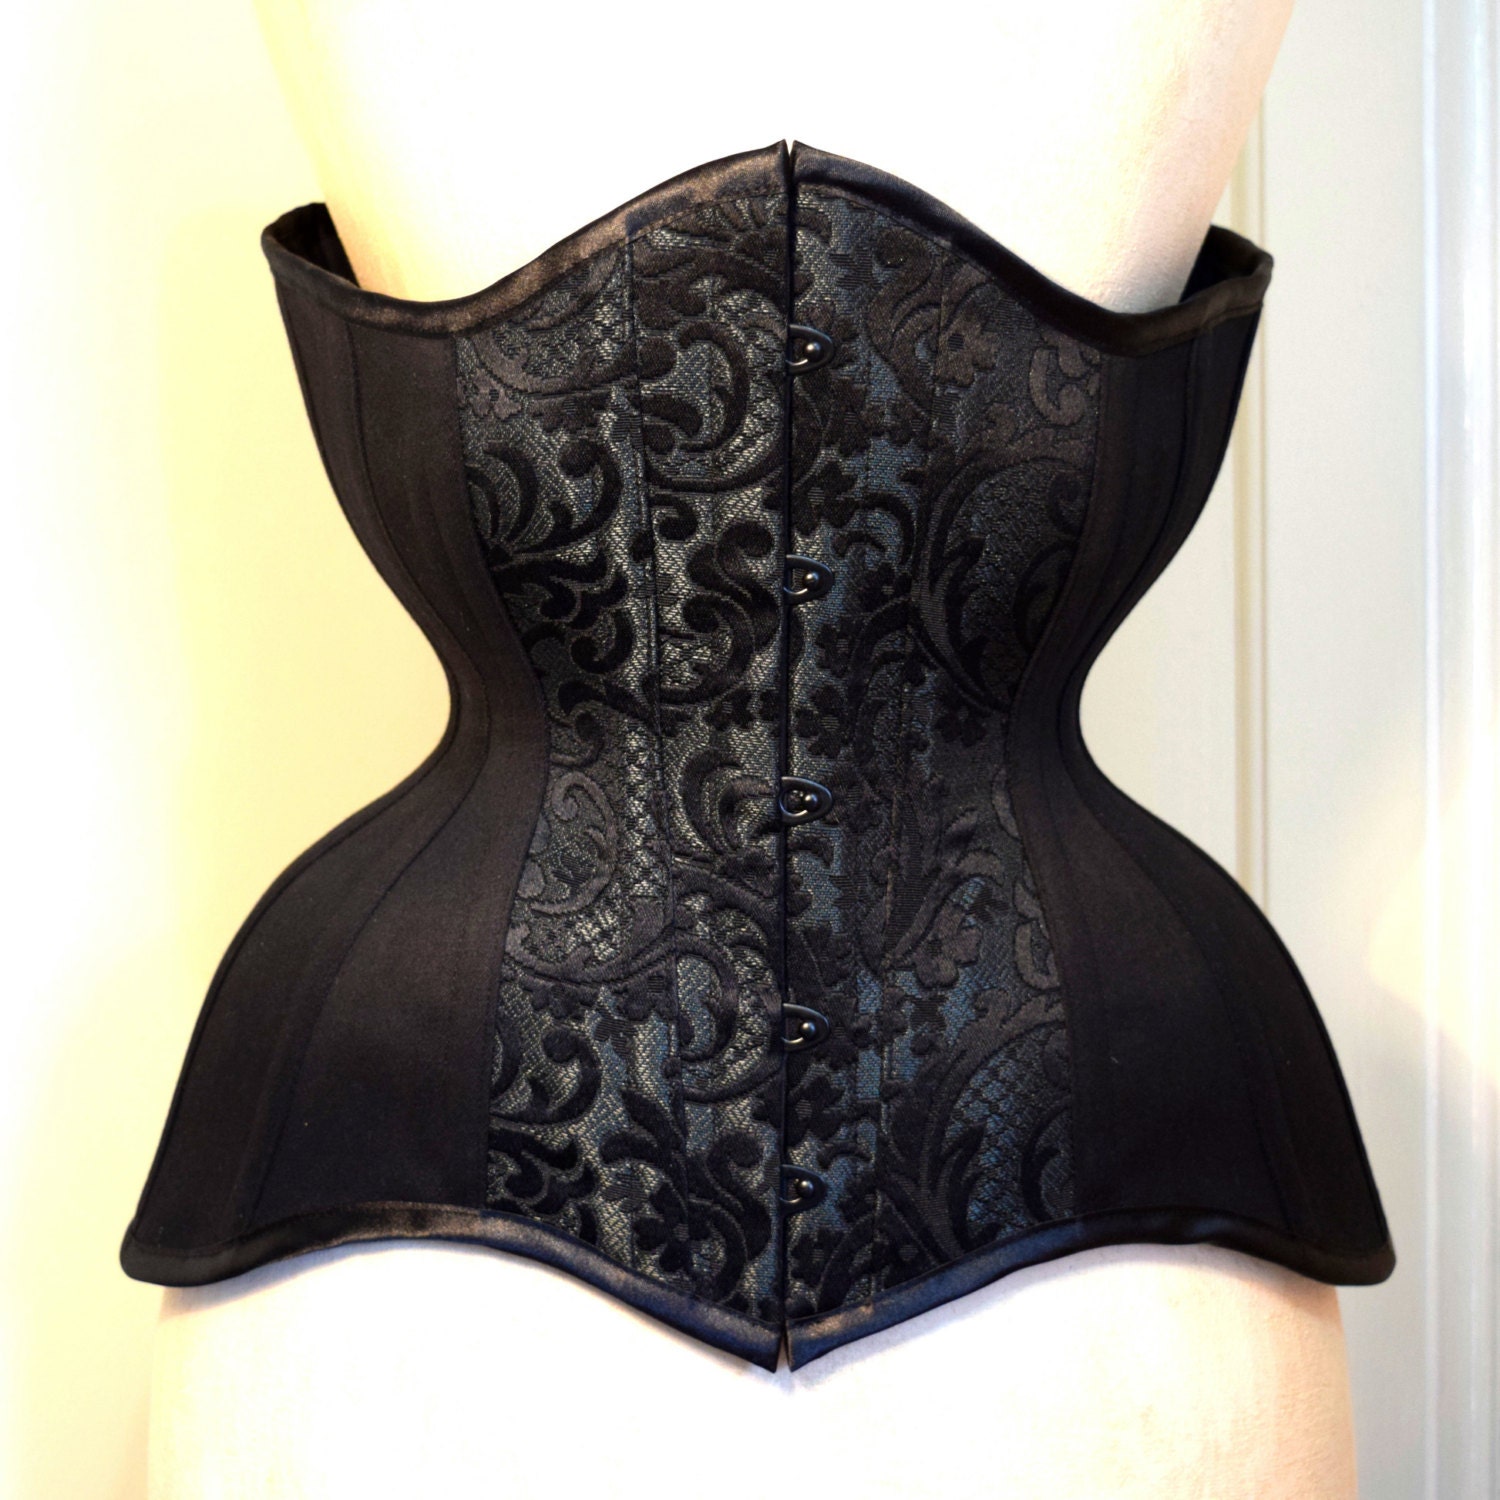 Sateen Coutil Longline Conical Rib Waist Training Corset 